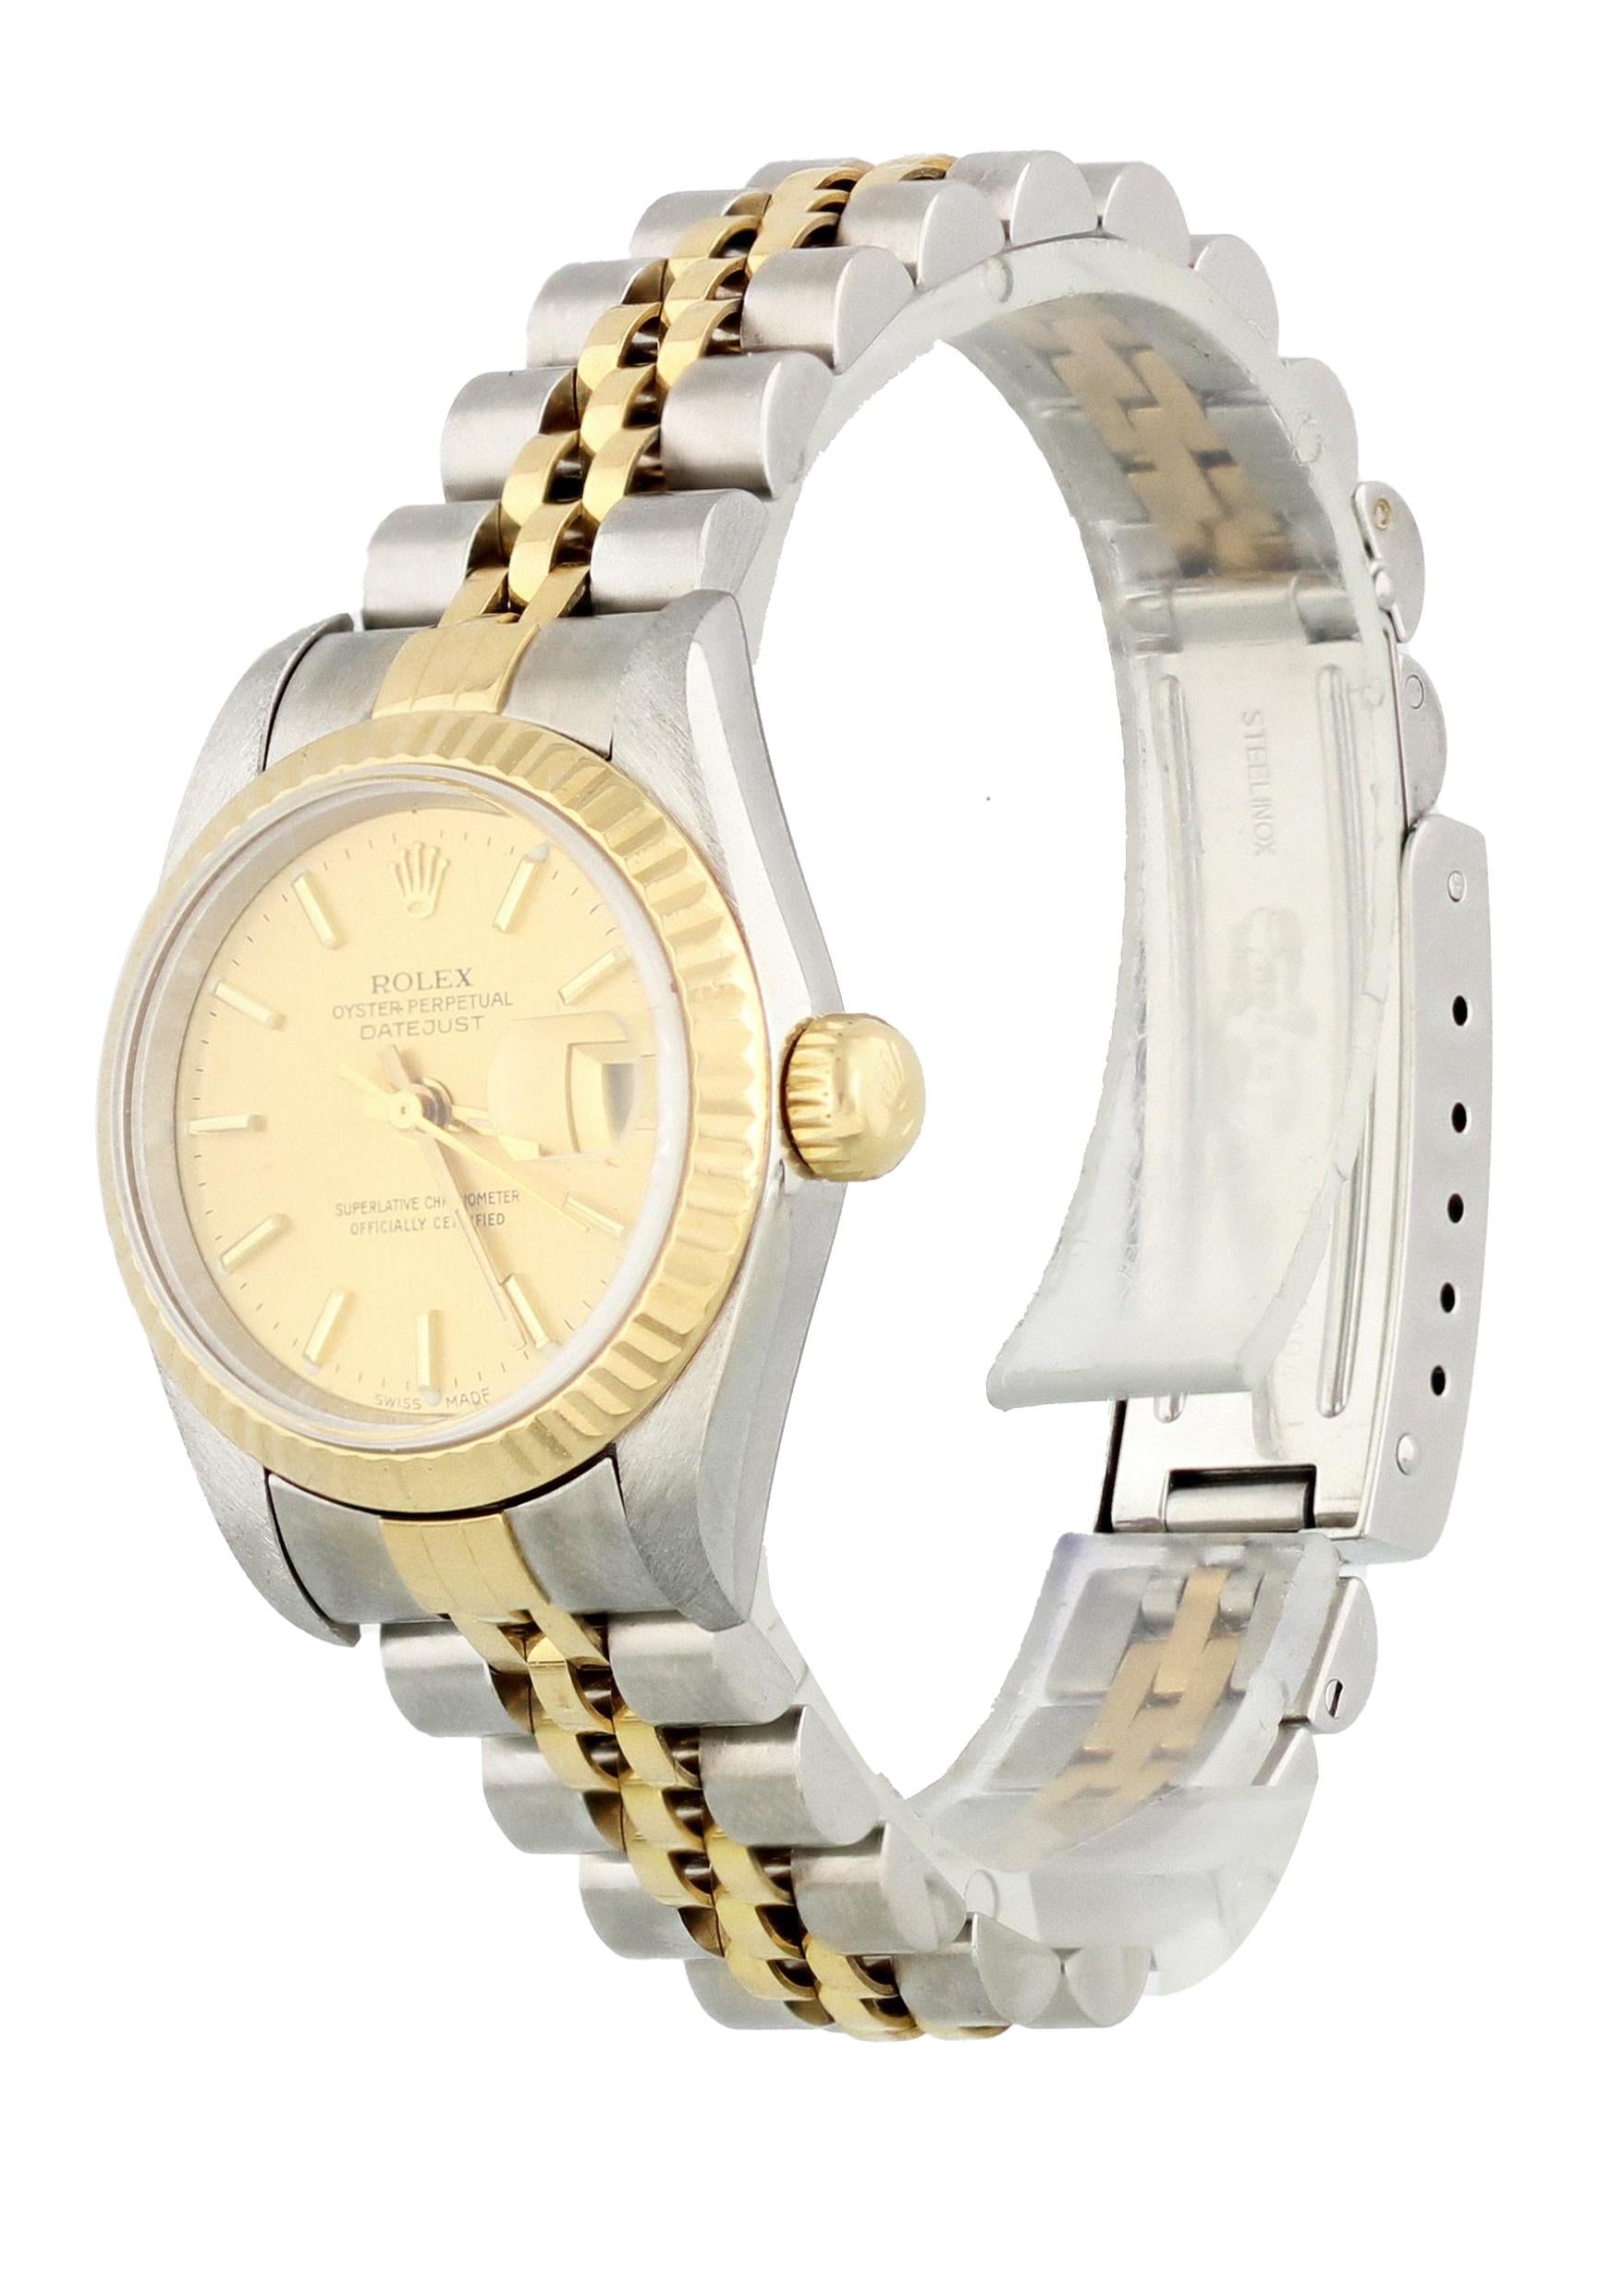 Rolex Datejust 79173 Ladies Watch. 26mm Stainless Steel case. Steel Two Tone Stationary bezel. Champagne dial with gold hands and index hour markers. Minute markers on the outer dial. Date display at the 3 o'clock position. Stainless Steel Bracelet